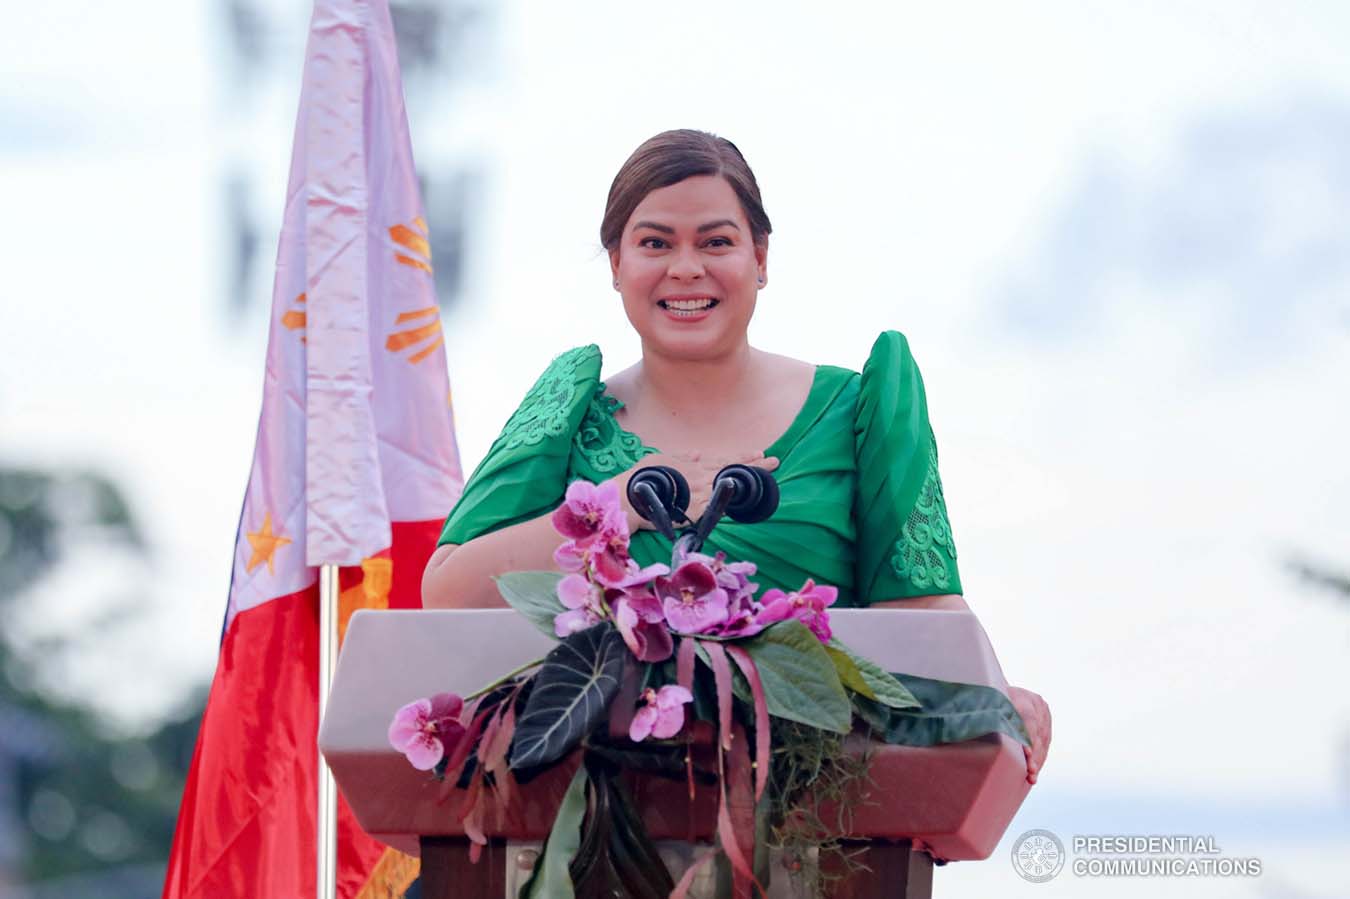 Vice President-elect Sara Zimmerman Duterte delivers her inaugural speech after taking her oath as the 15th Vice President of the Philippines which was witnessed by her father, President Rodrigo Roa Duterte, at San Pedro Square, Poblacion District in Davao City on June 19, 2022. ARMAN BAYLON/ PRESIDENTIAL PHOTO